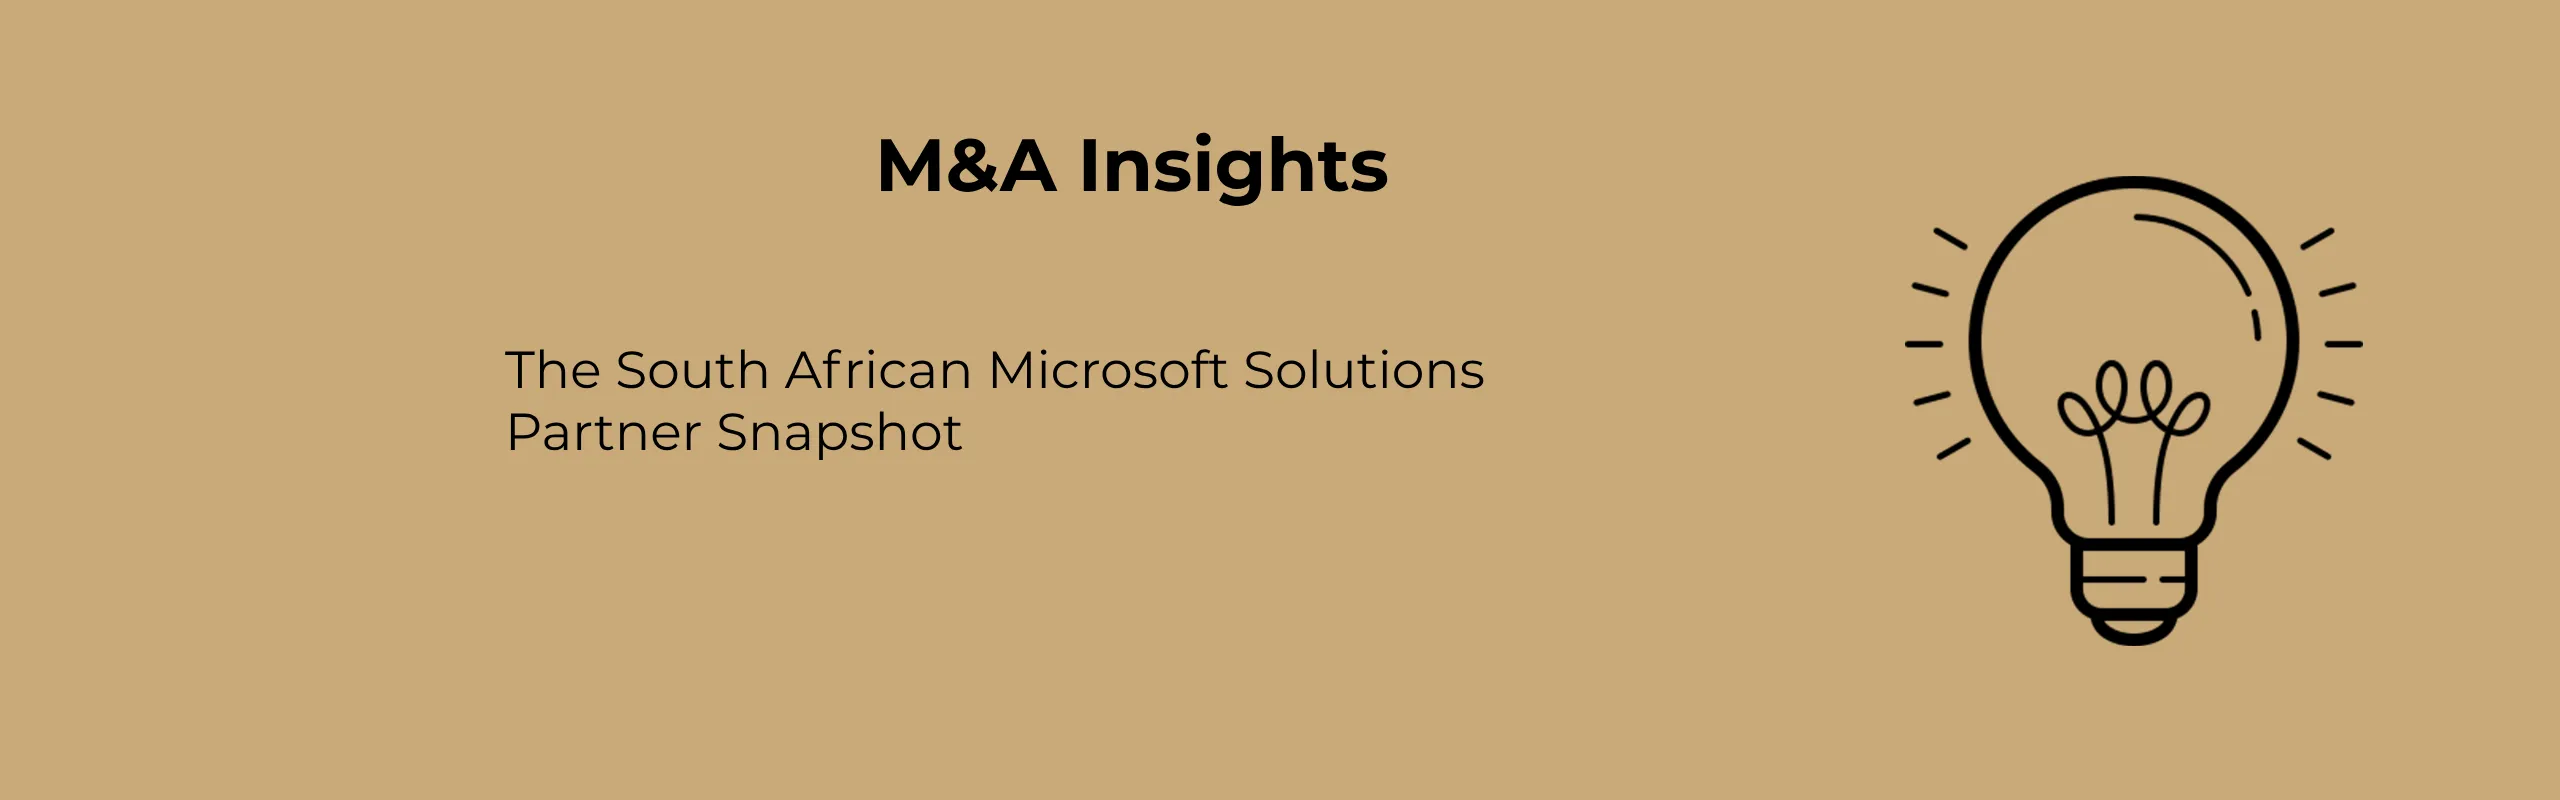 The South African Microsoft Solutions Partner Snapshot